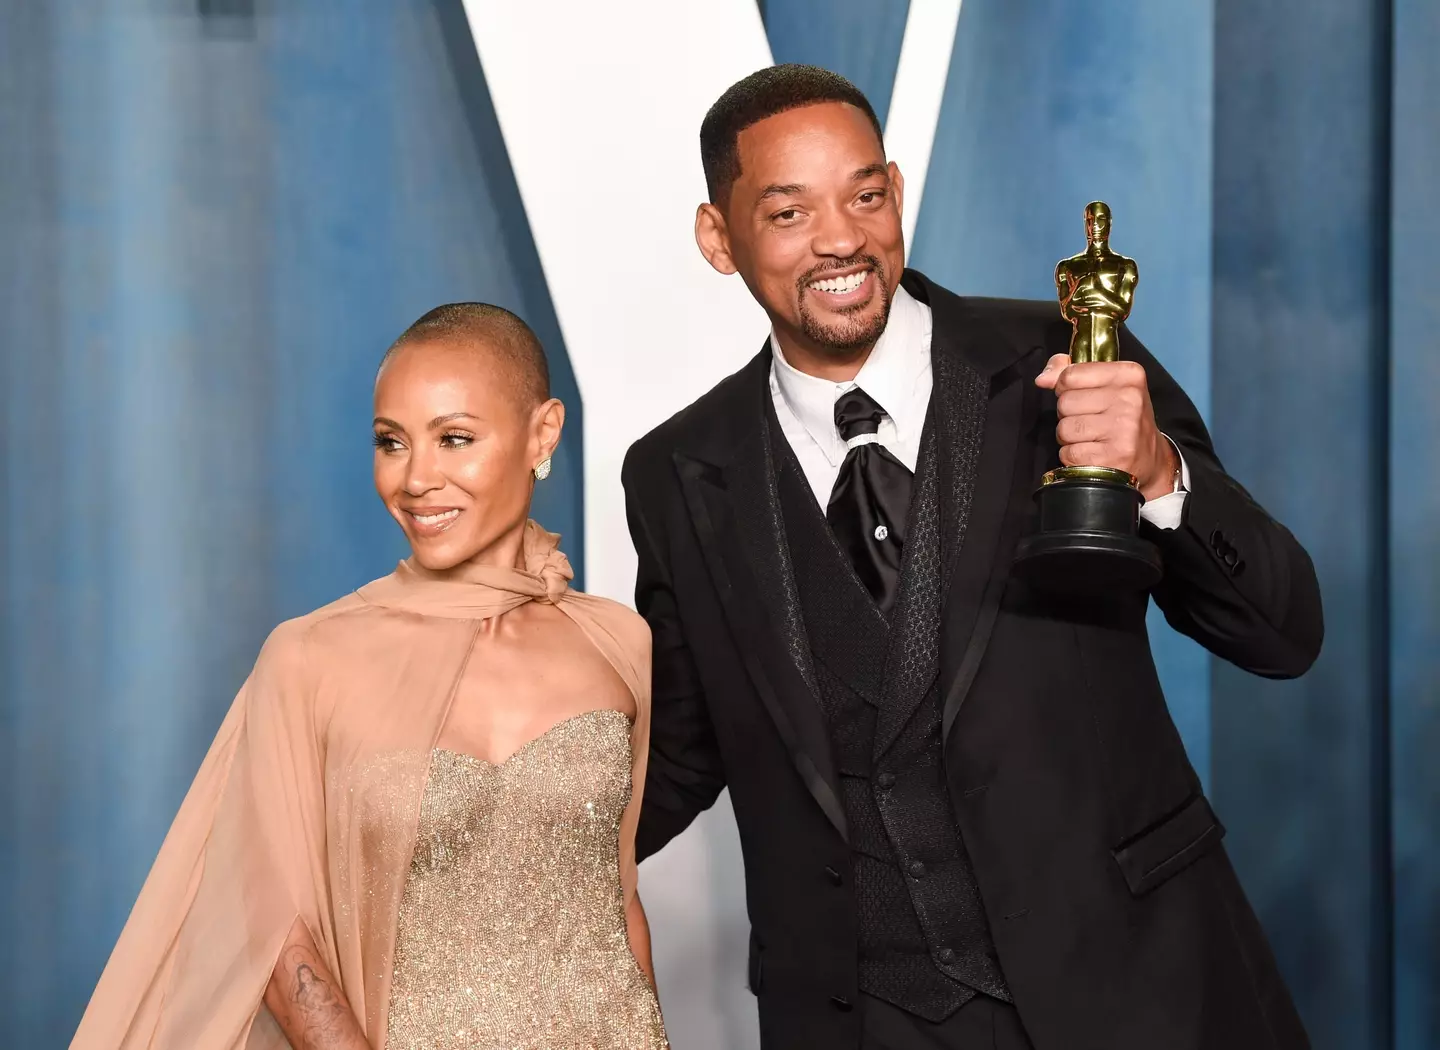 Will Smith and Jada Pinkett Smith after the ceremony.